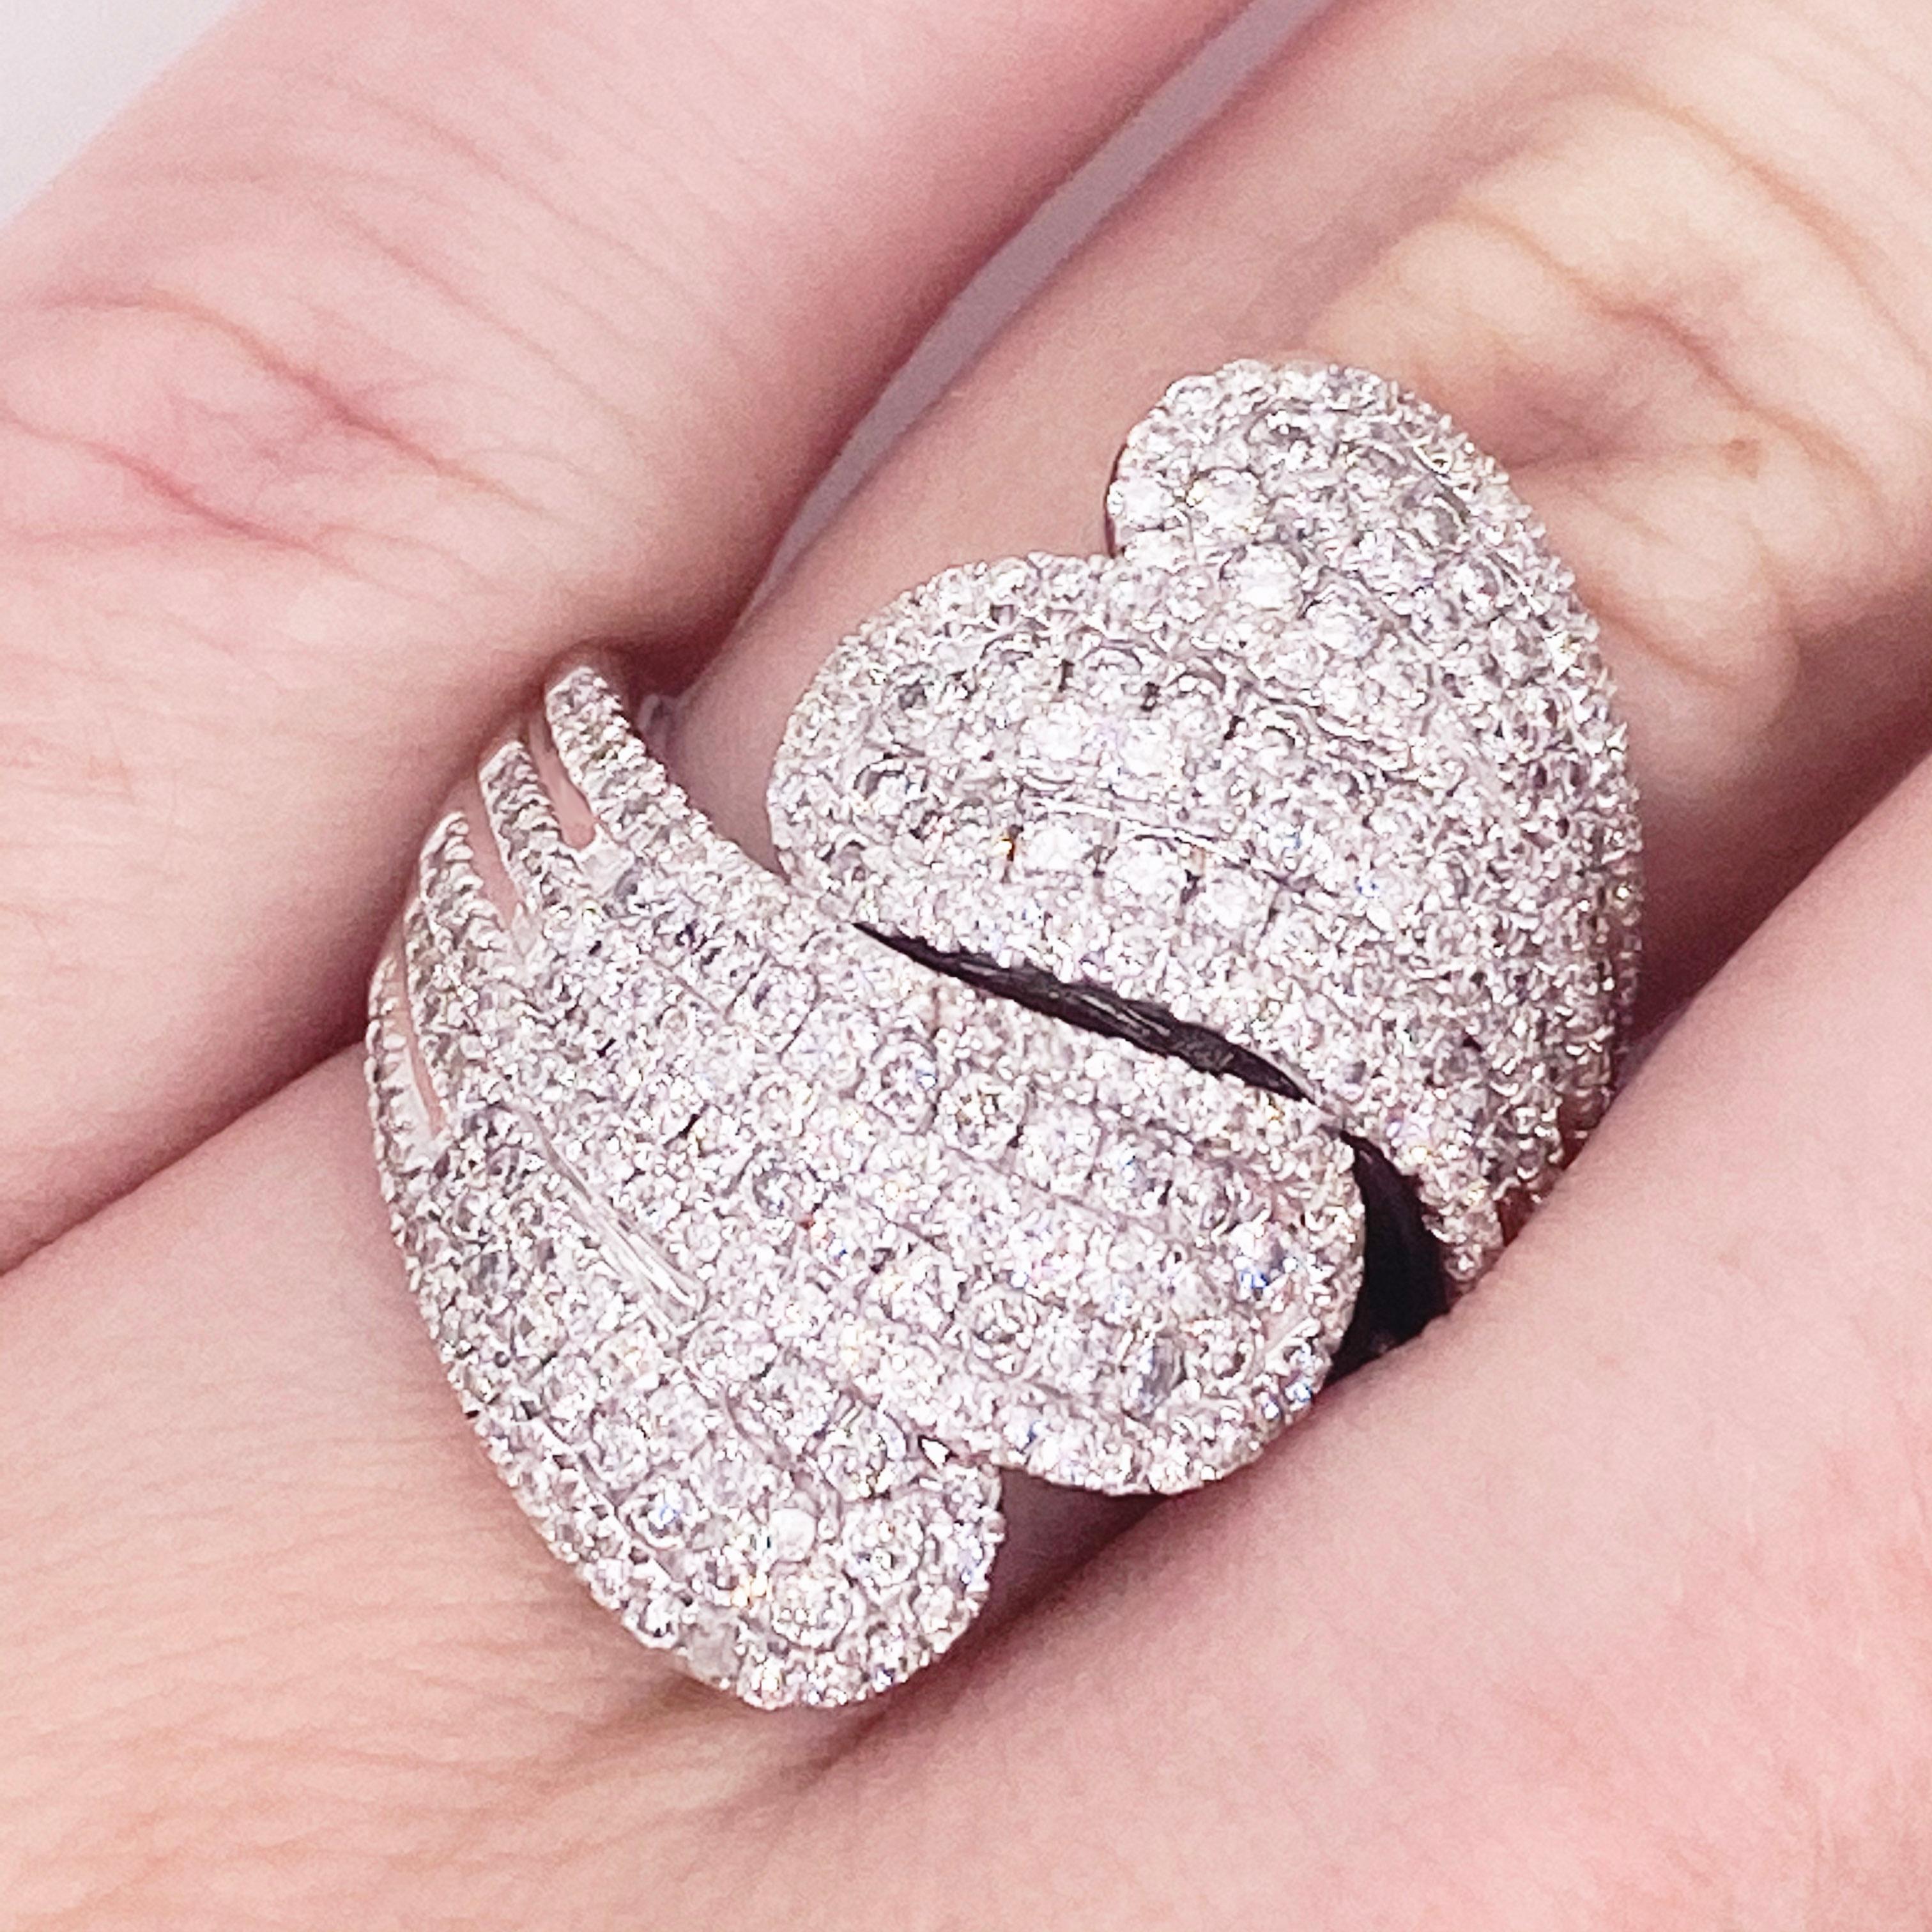 This stunning 14 Karat White Gold statement ring dripping with 1.79 Carats of diamonds is a showstopper! It is impossible not to feel glamorous with this gorgeous ring gracing your finger. This ring would make the perfect gift for your loved one or